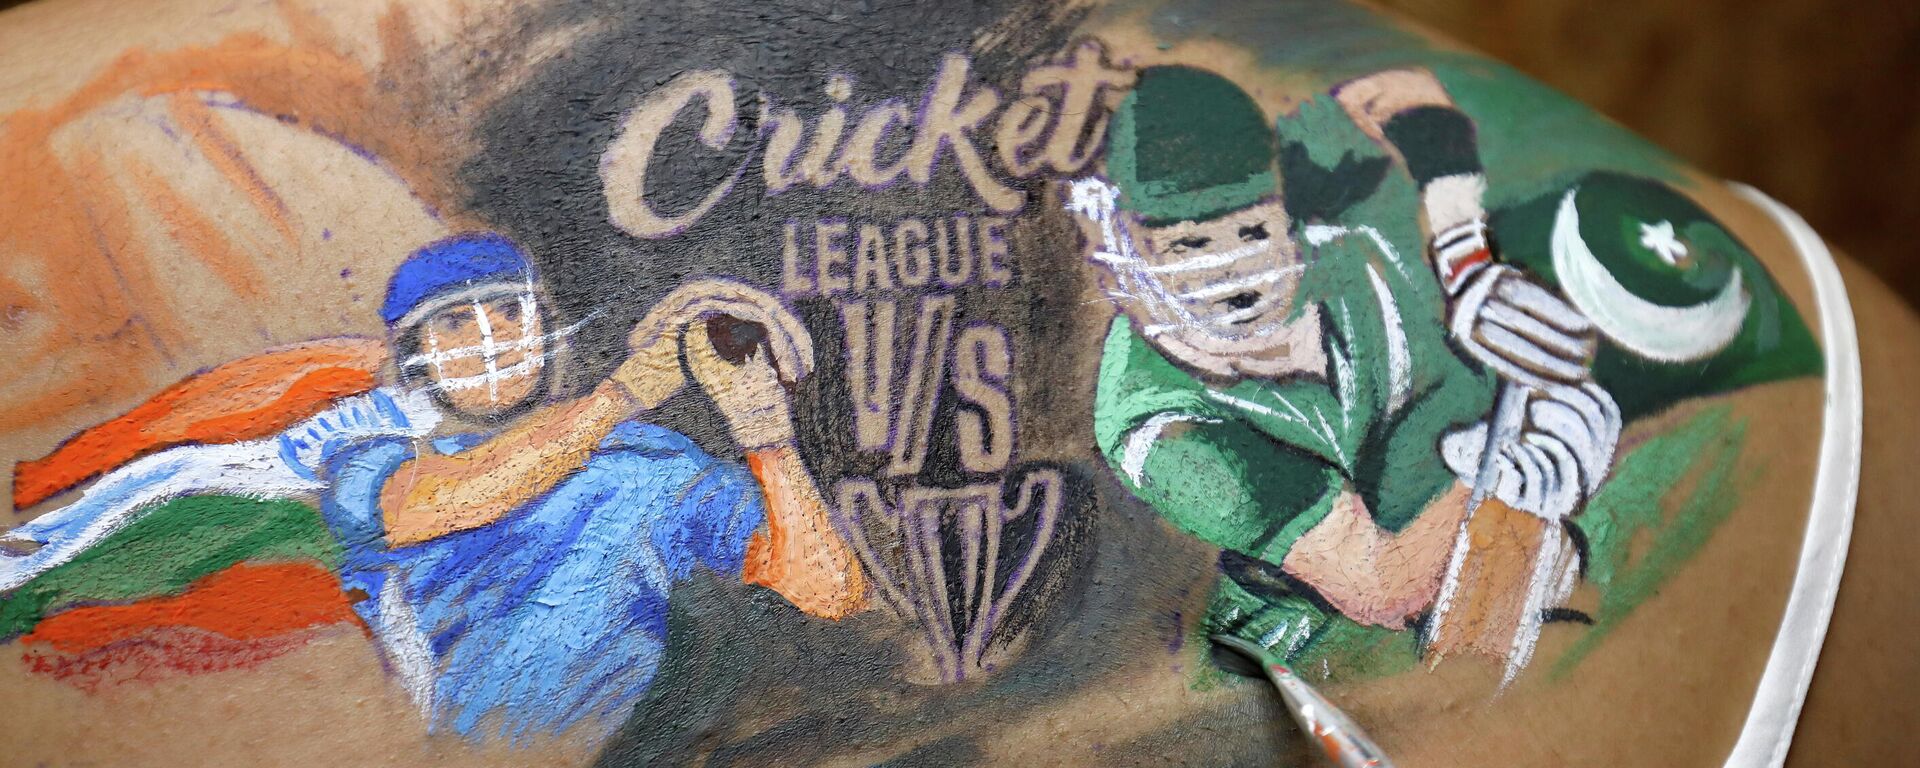 A cricket fan gets her back painted before the start of the first match between India and Pakistan in Twenty20 World Cup Super 12 stage in Dubai, in Ahmedabad, India, October 24, 2021 - Sputnik International, 1920, 25.10.2021